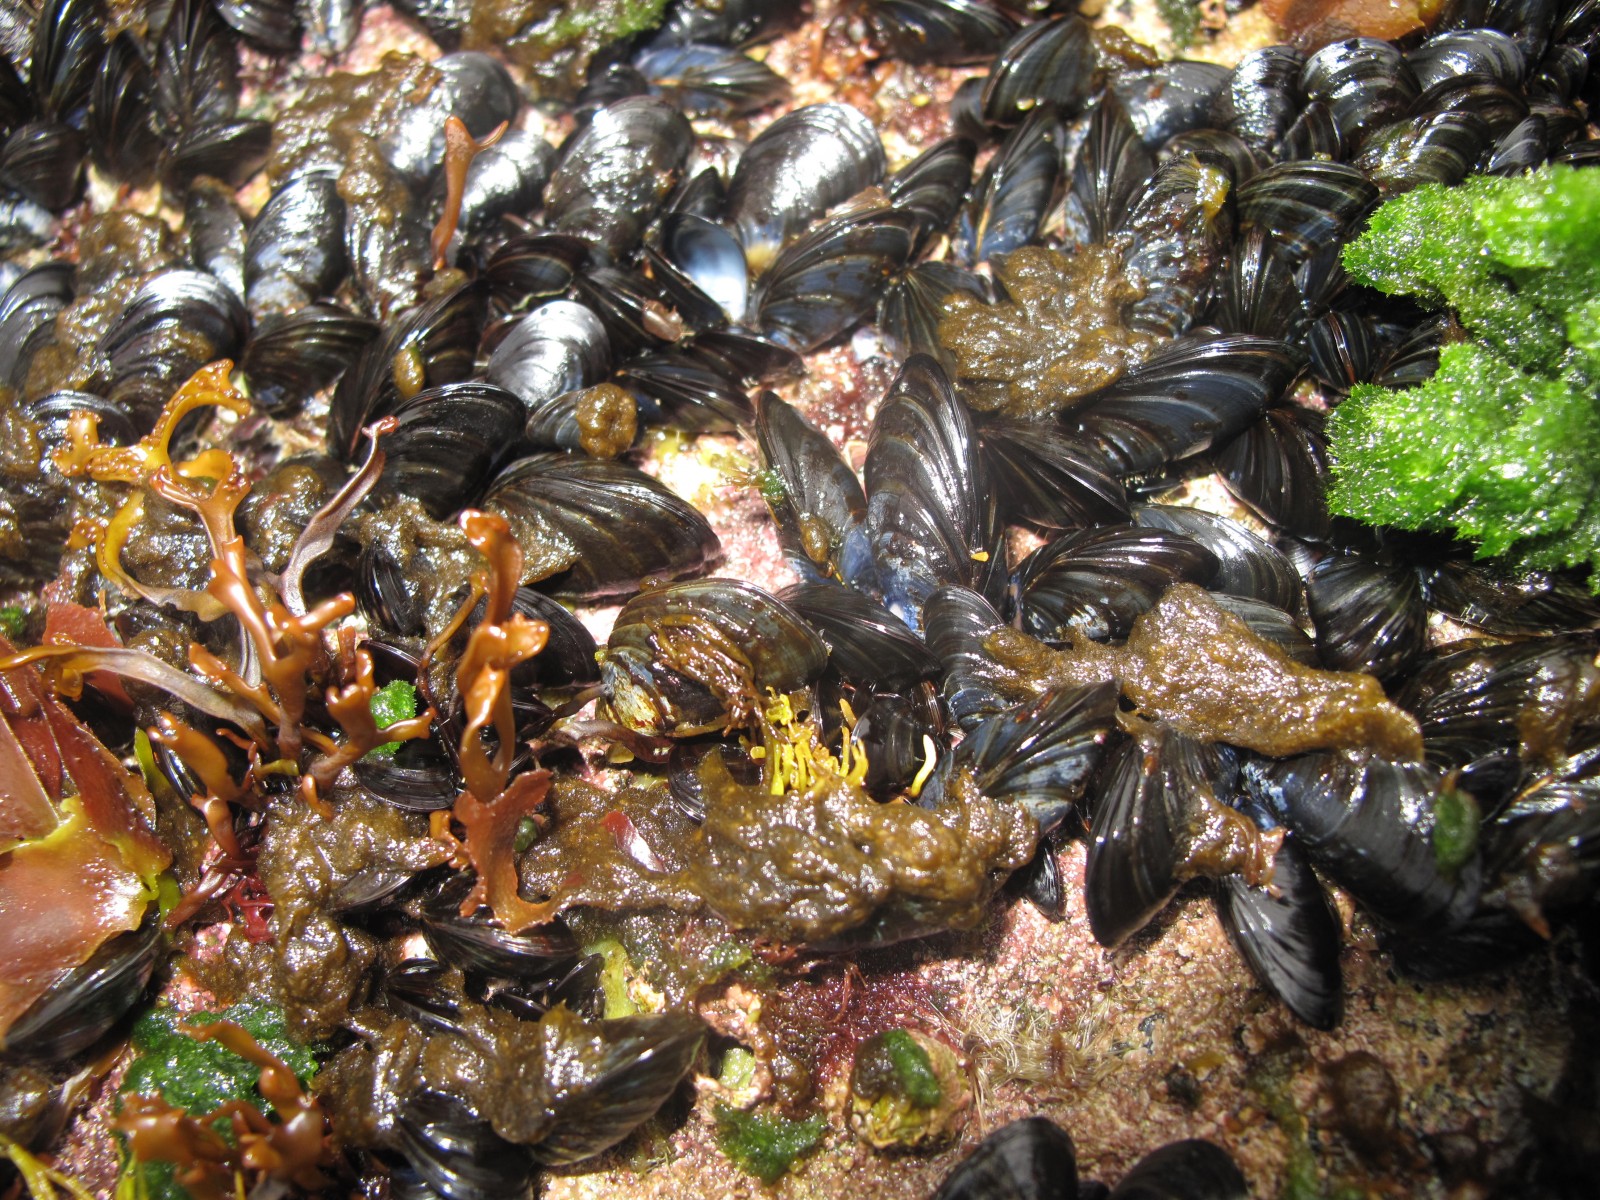 Blue mussels – we collected some of these and steamed them up for an appetizer